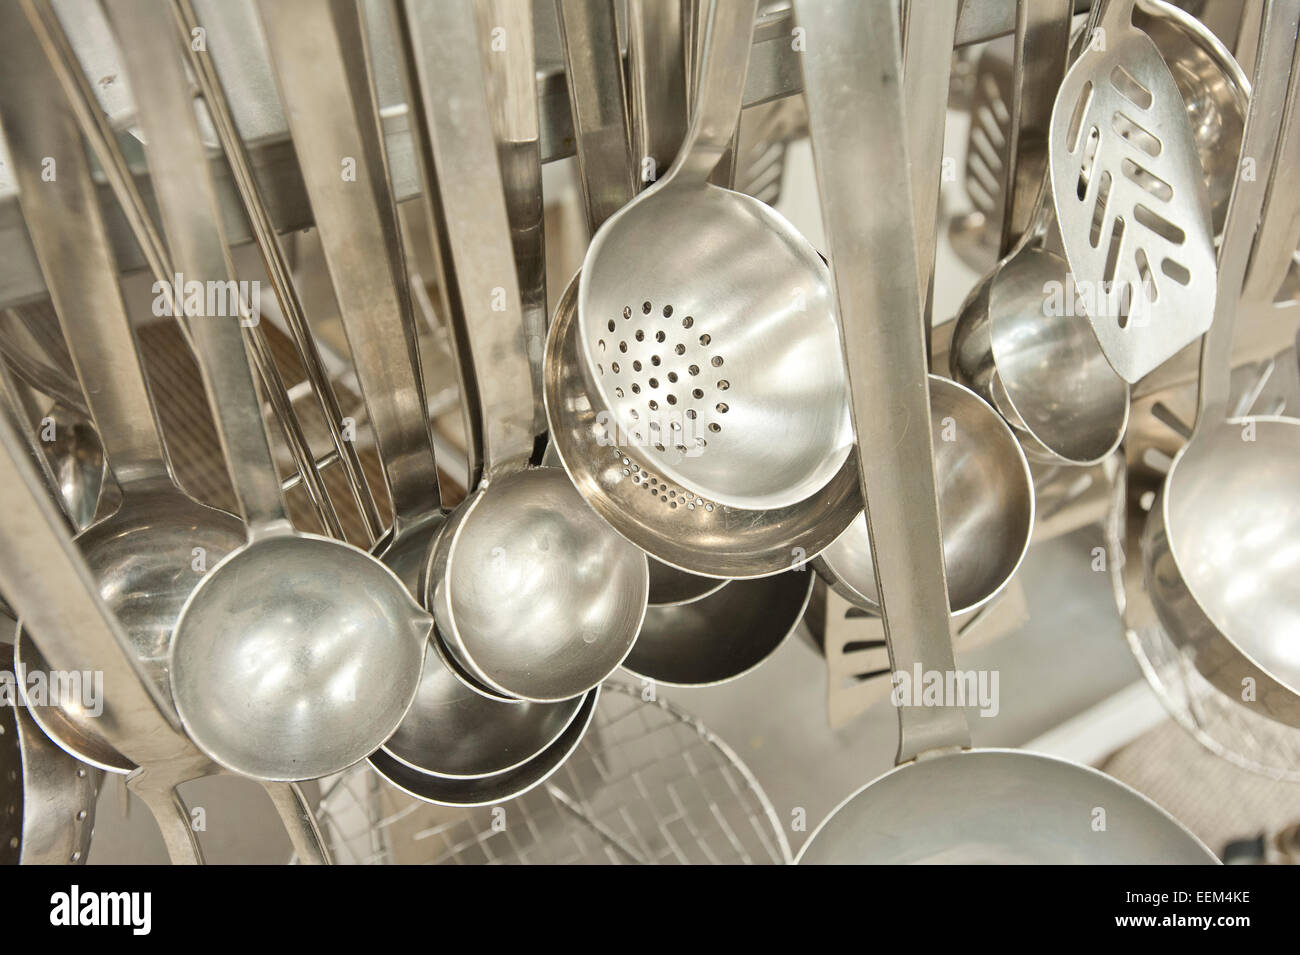 Ladles, slotted spoon, kitchen tools in an industrial kitchen, Germany Stock Photo